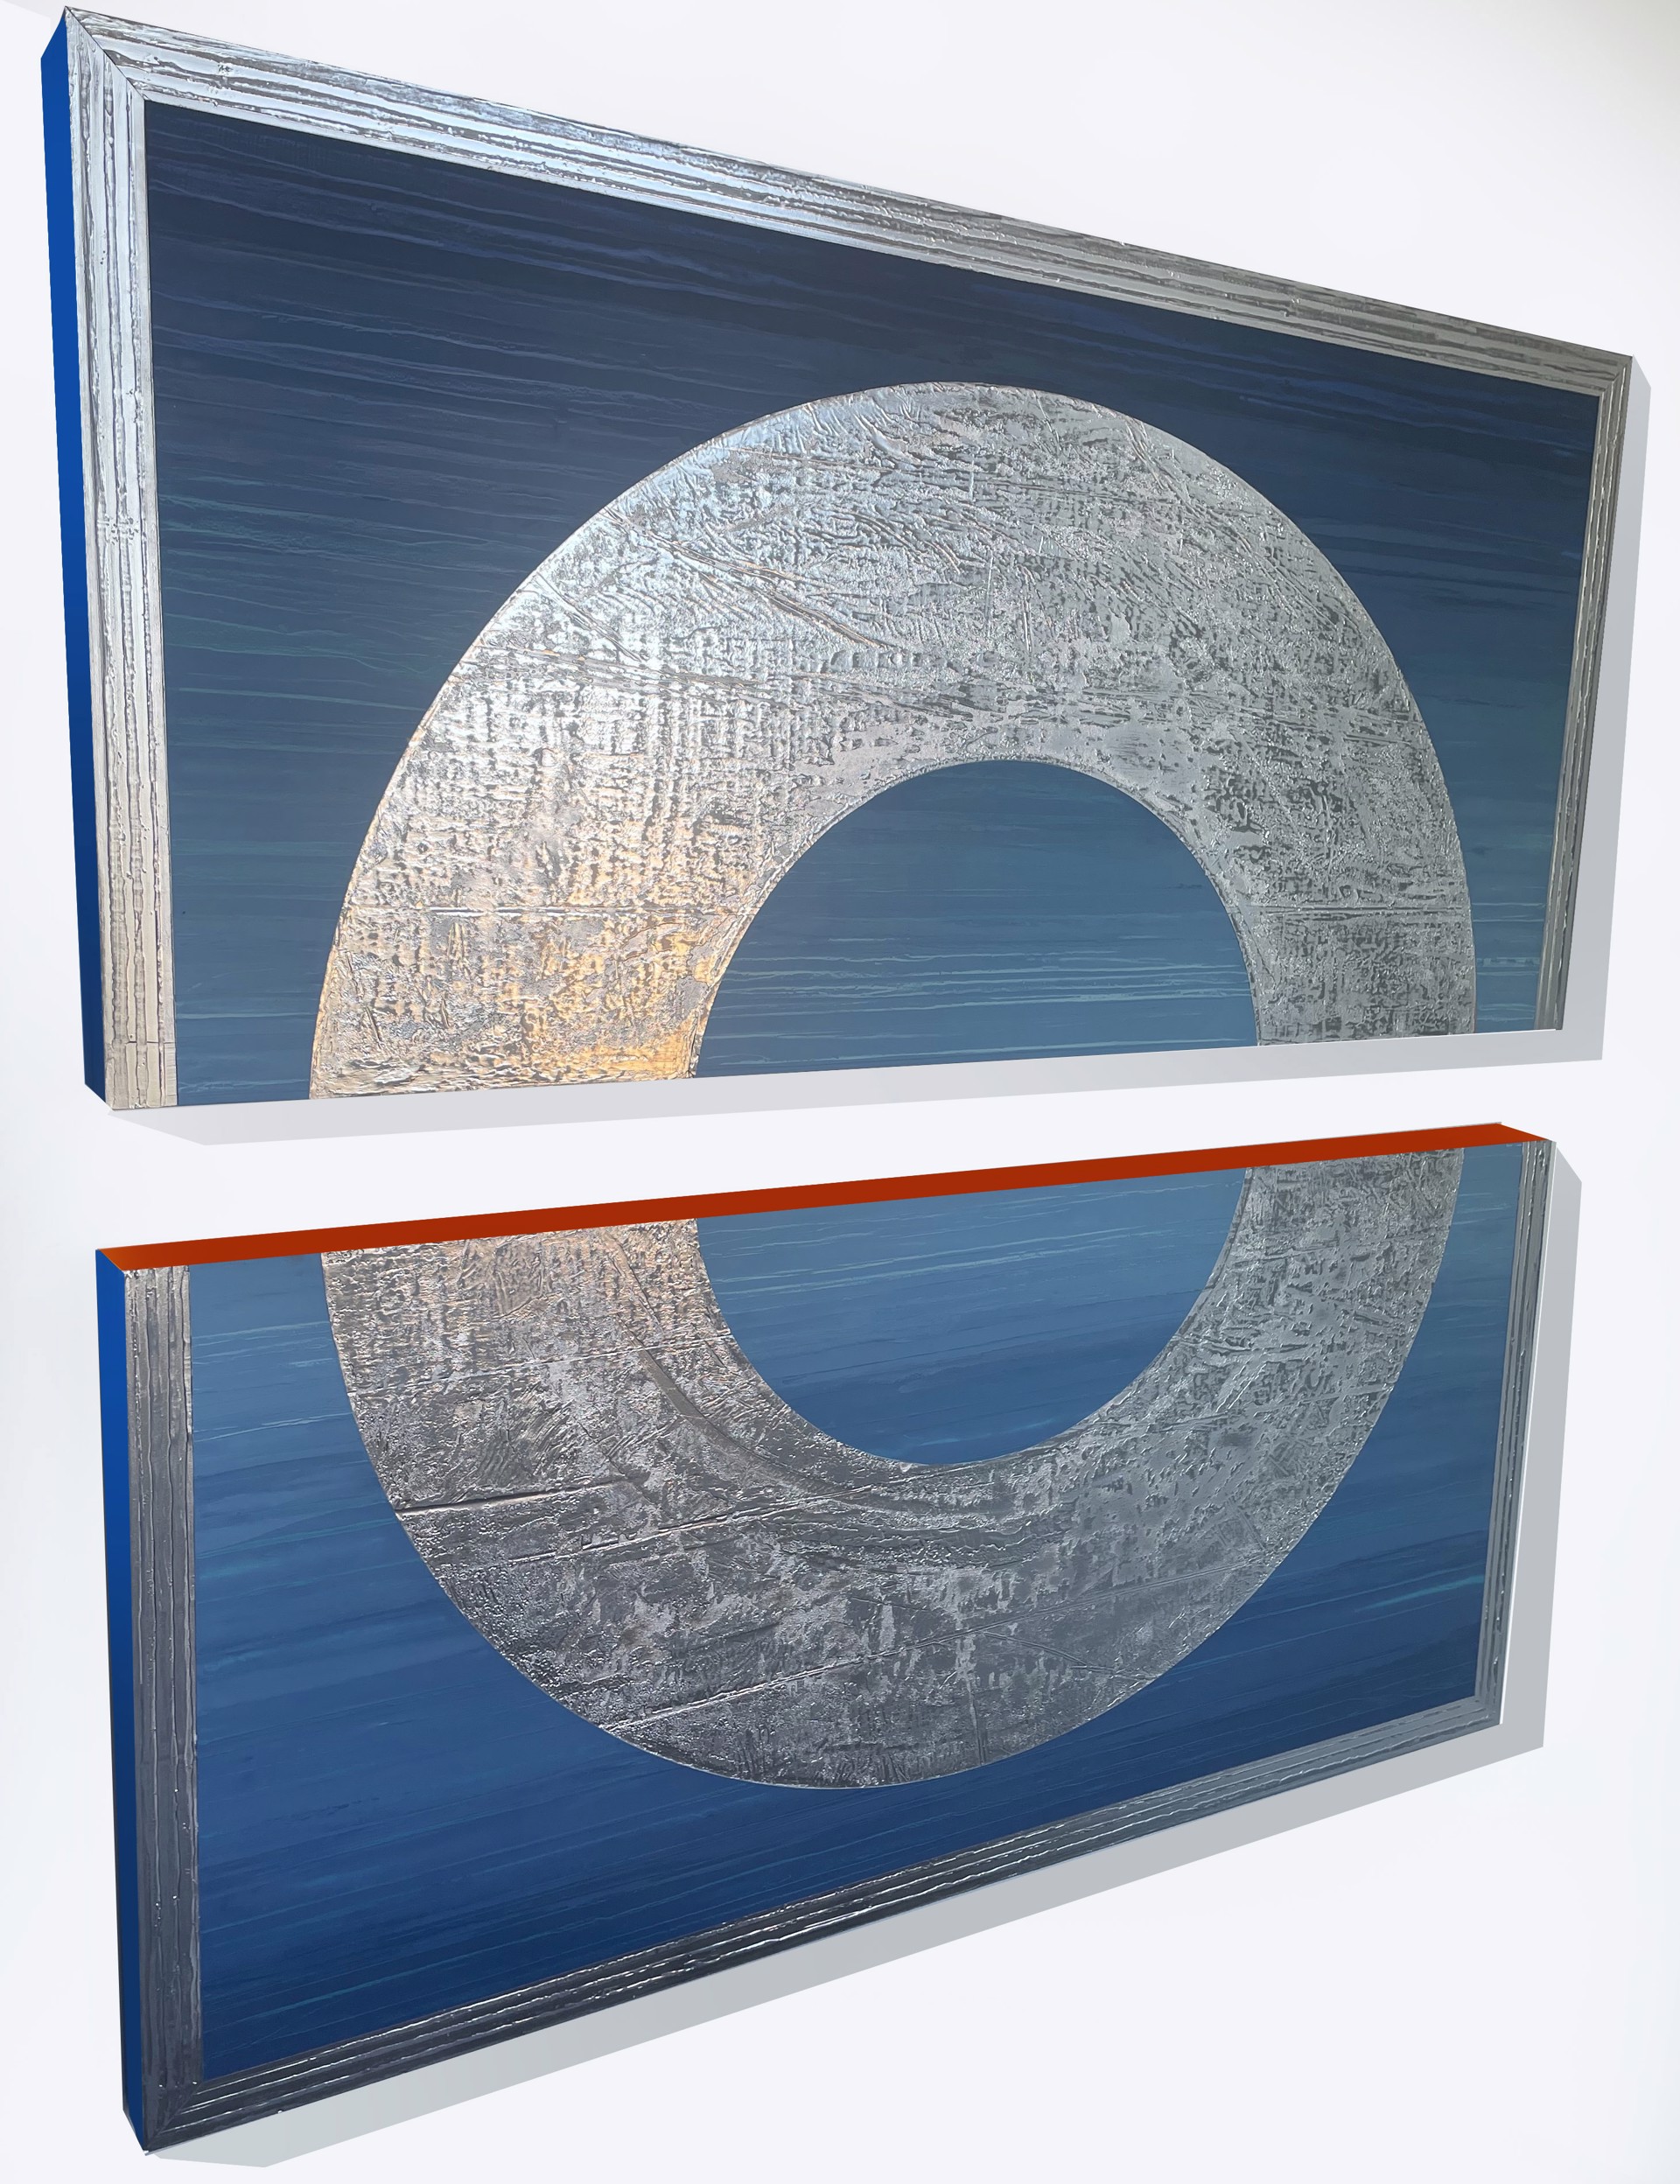 California artist and painter Stephanie Paige's 60"H x 60"W painting Wisdom is a beautiful diptych made of two wood panels with layers of blue marble plaster paint, a silver outline and a silver leafed circle.